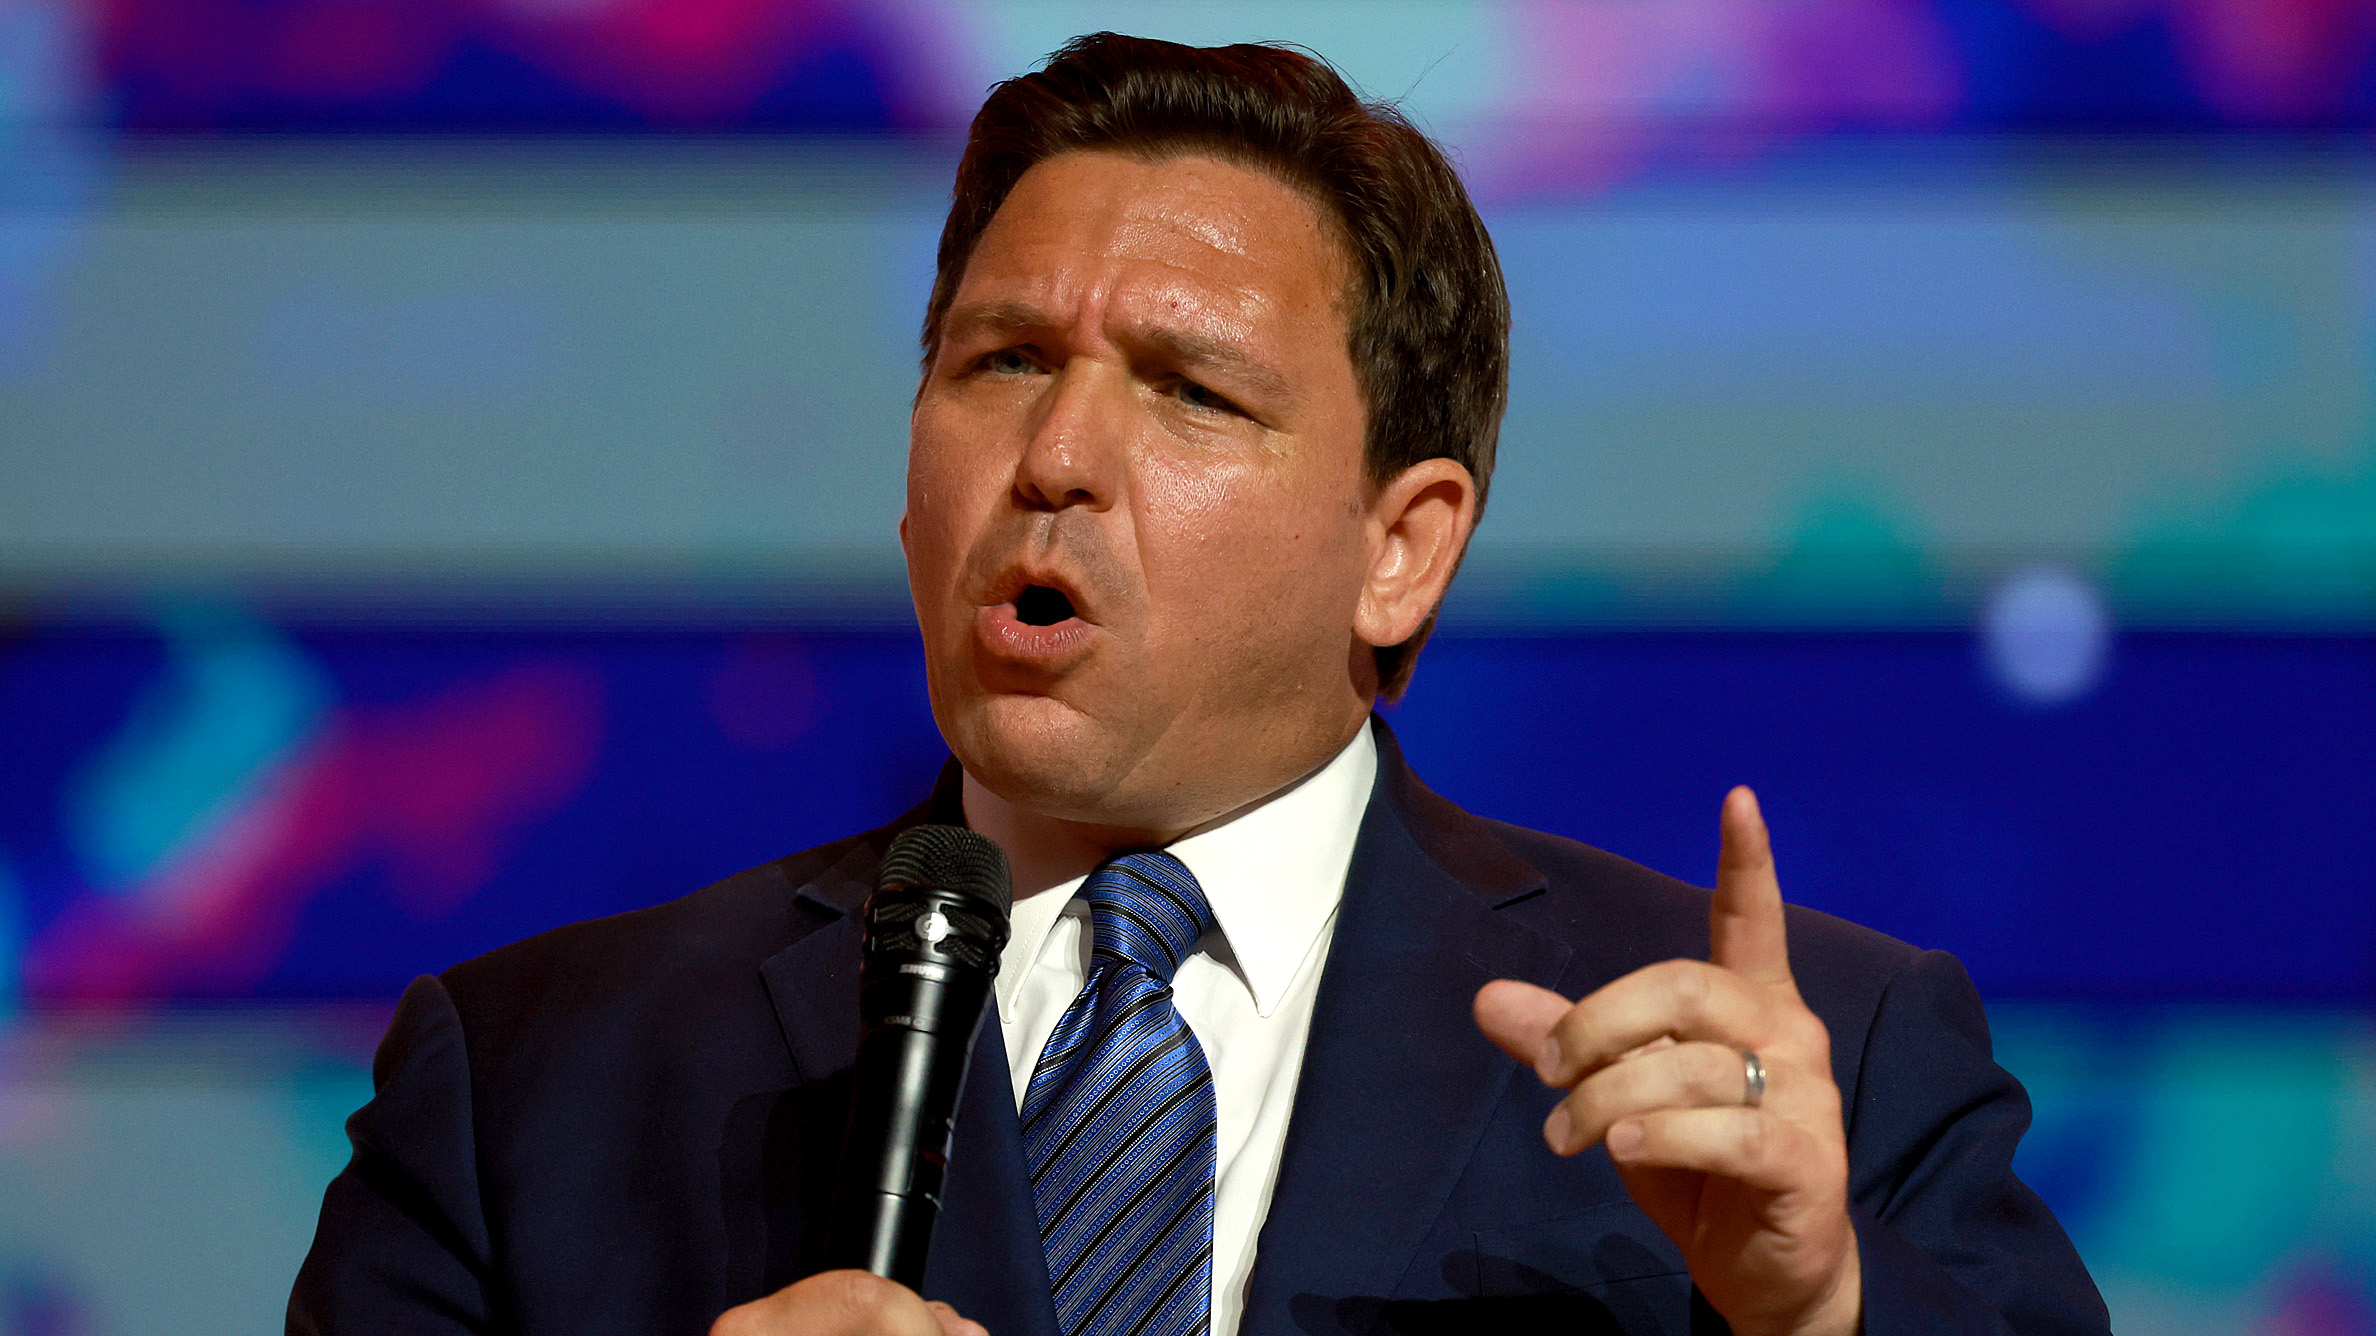 Conservatives Cheer After DeSantis Sends Illegal Immigrants To Marthas Vineyard Time To Pay Their Fair Share